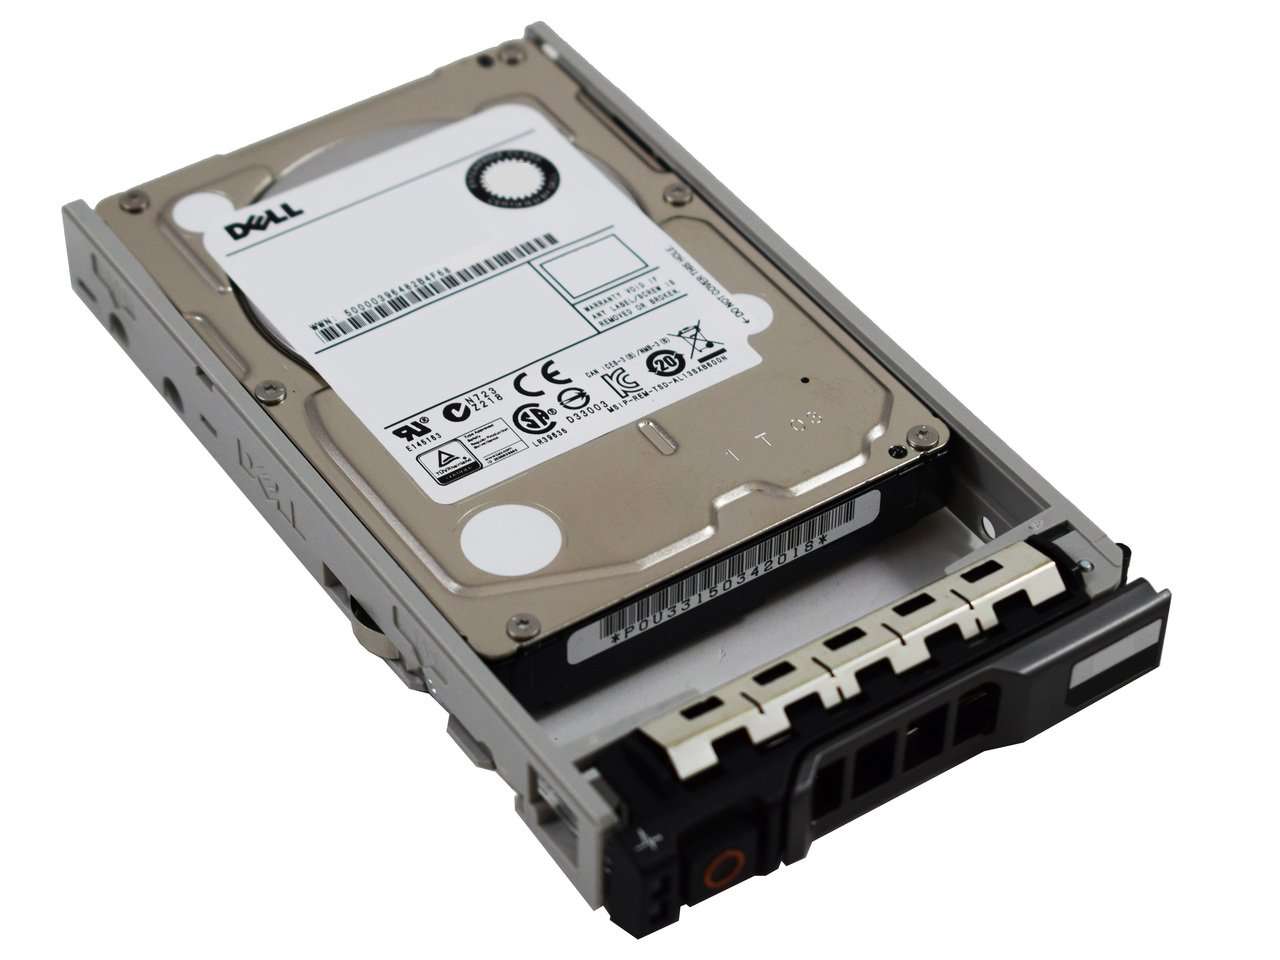 Dell G13 010DR3 600GB 10K RPM SAS 12Gb/s 512n 2.5" Manufacturer Recertified HDD